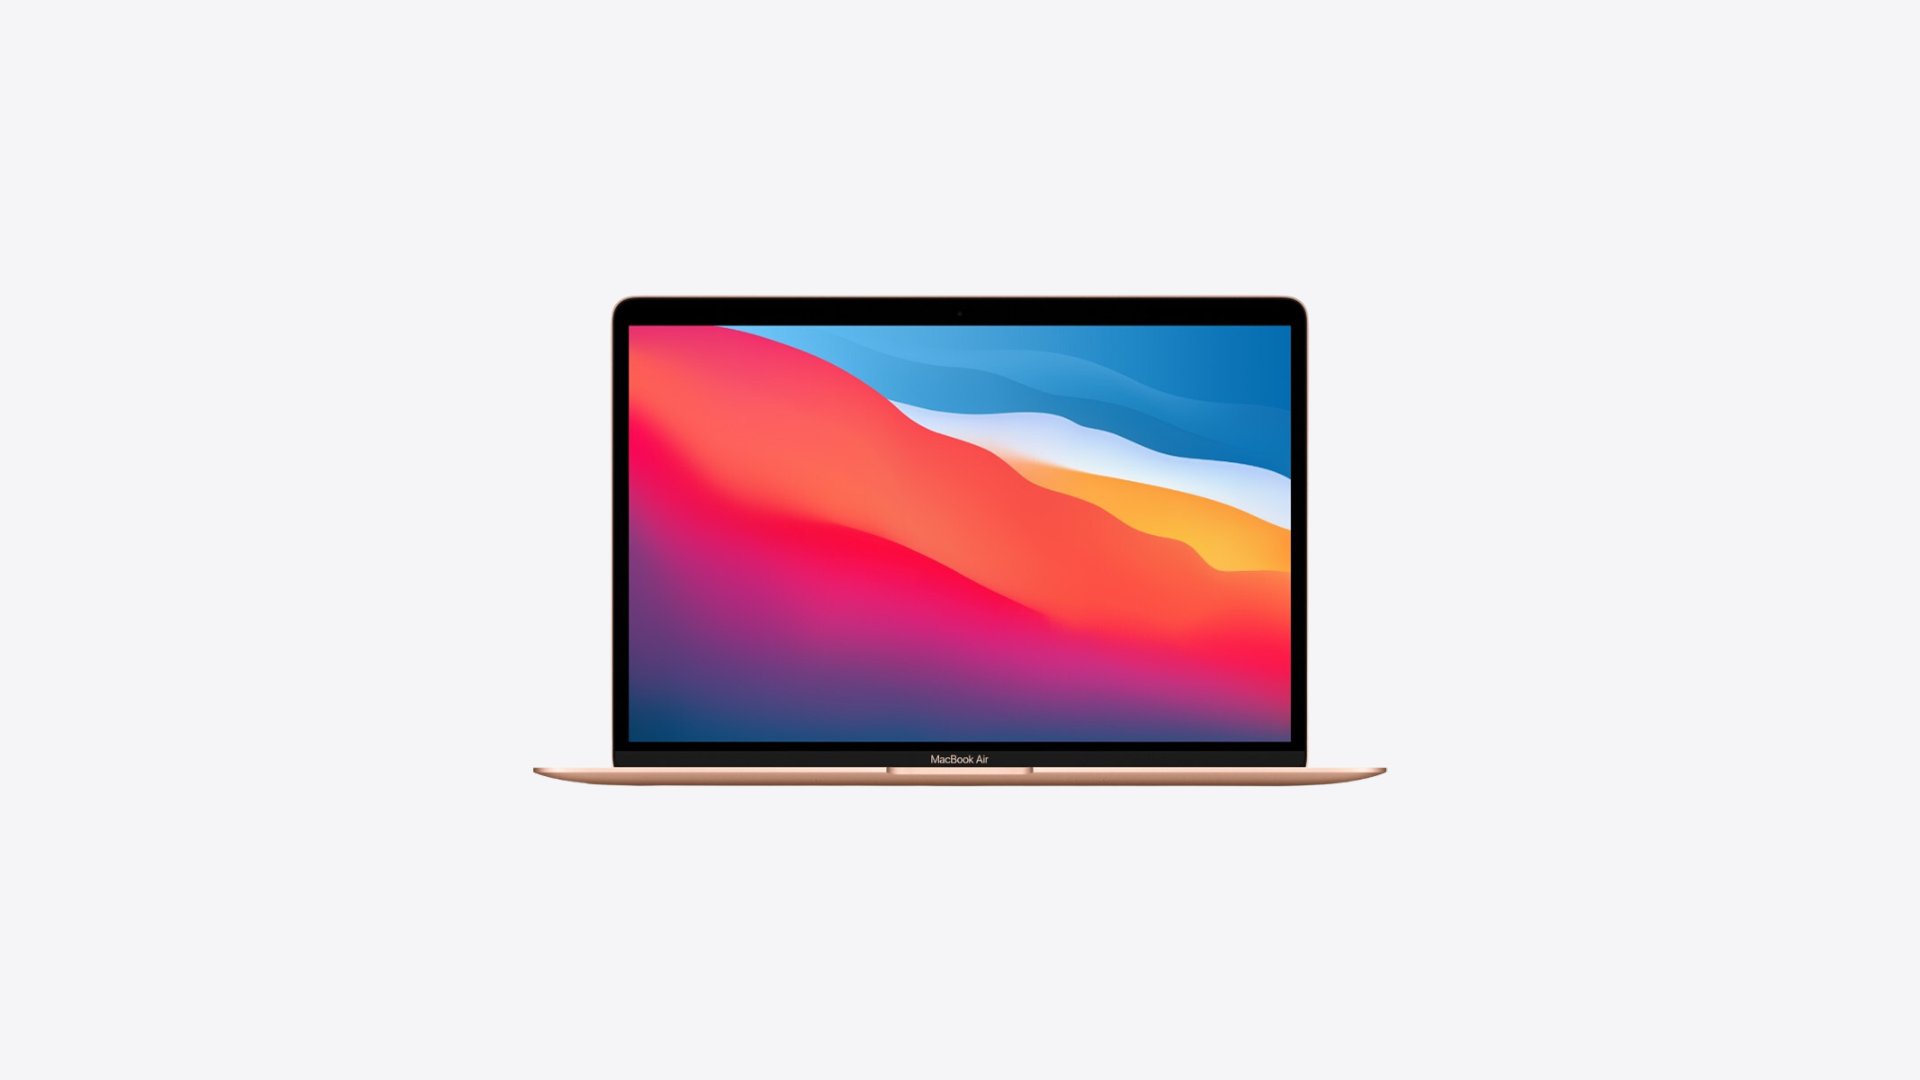 13-inch MacBook Air with M1 Chip, 512GB